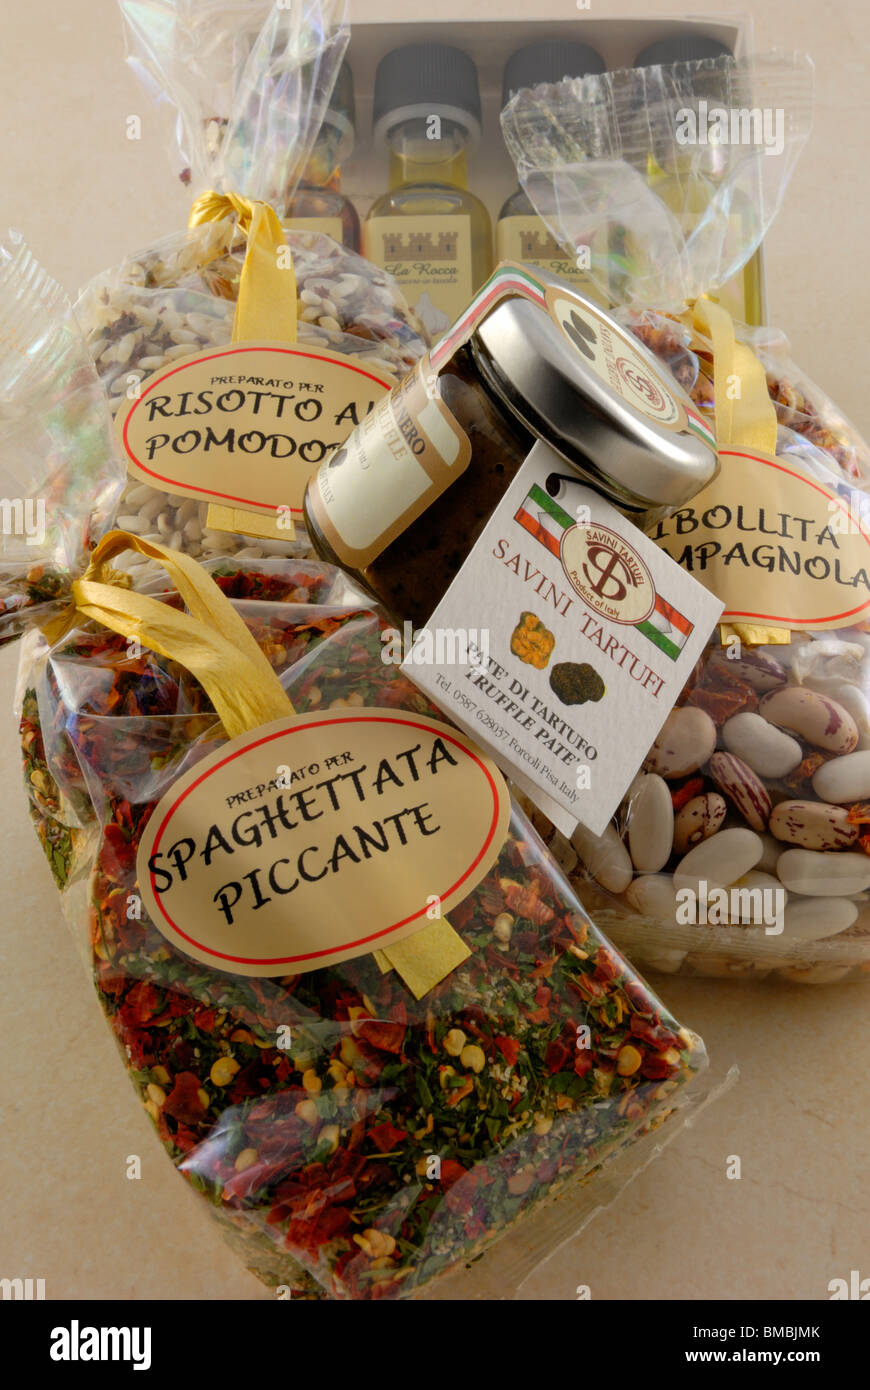 Prodotti Tipici Toscani, Typical Products of Tuscany. Tuscany's rich gastronomic tradition is reflected in the numerous of local Stock Photo